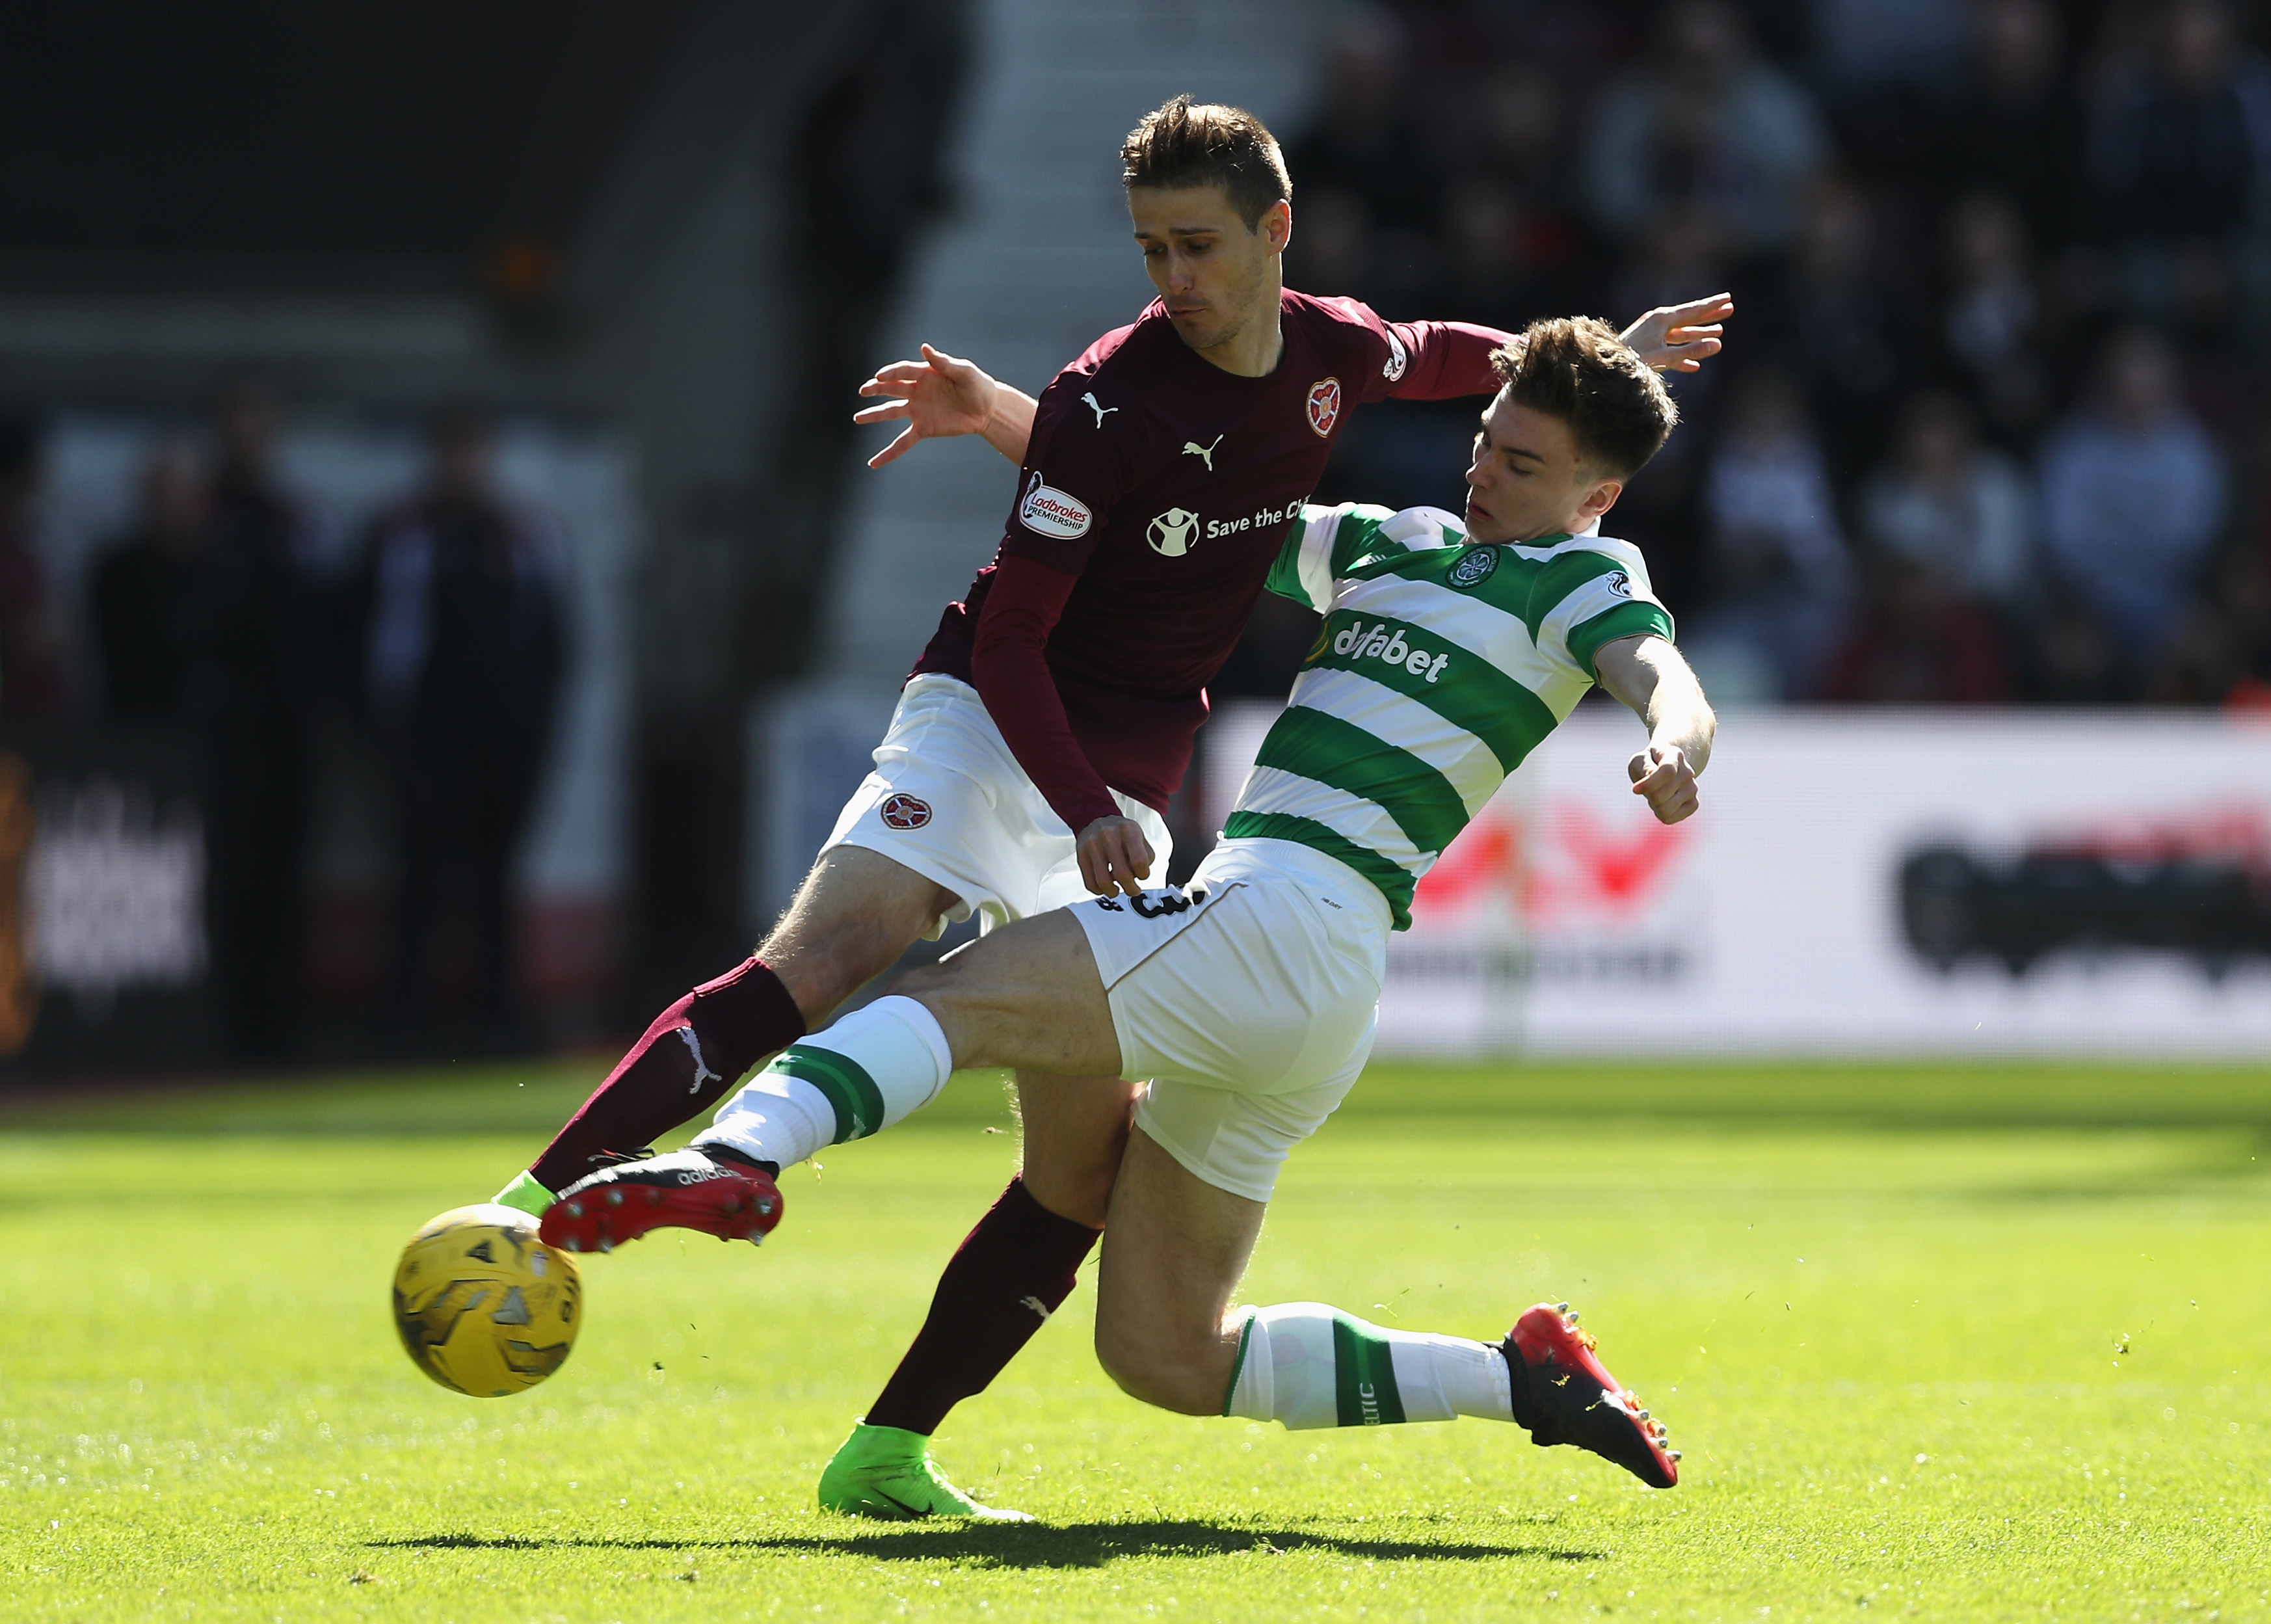 EDINBURGH, SCOTLAND - APRIL 02:  Andraz Struna of Hearts (L) and Kieran Tierney of Celtic (R) battle for possession during the Ladbrokes Scottish Premiership match between Hearts and Celtic at Tynecastle Stadium on April 2, 2017 in Edinburgh, Scotland.  (Photo by Ian MacNicol/Getty Images)